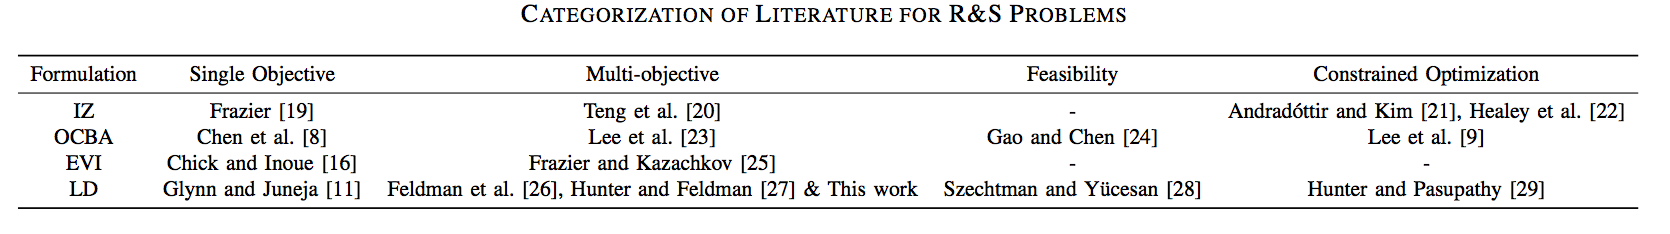 Ranking_Selection_Literature.png